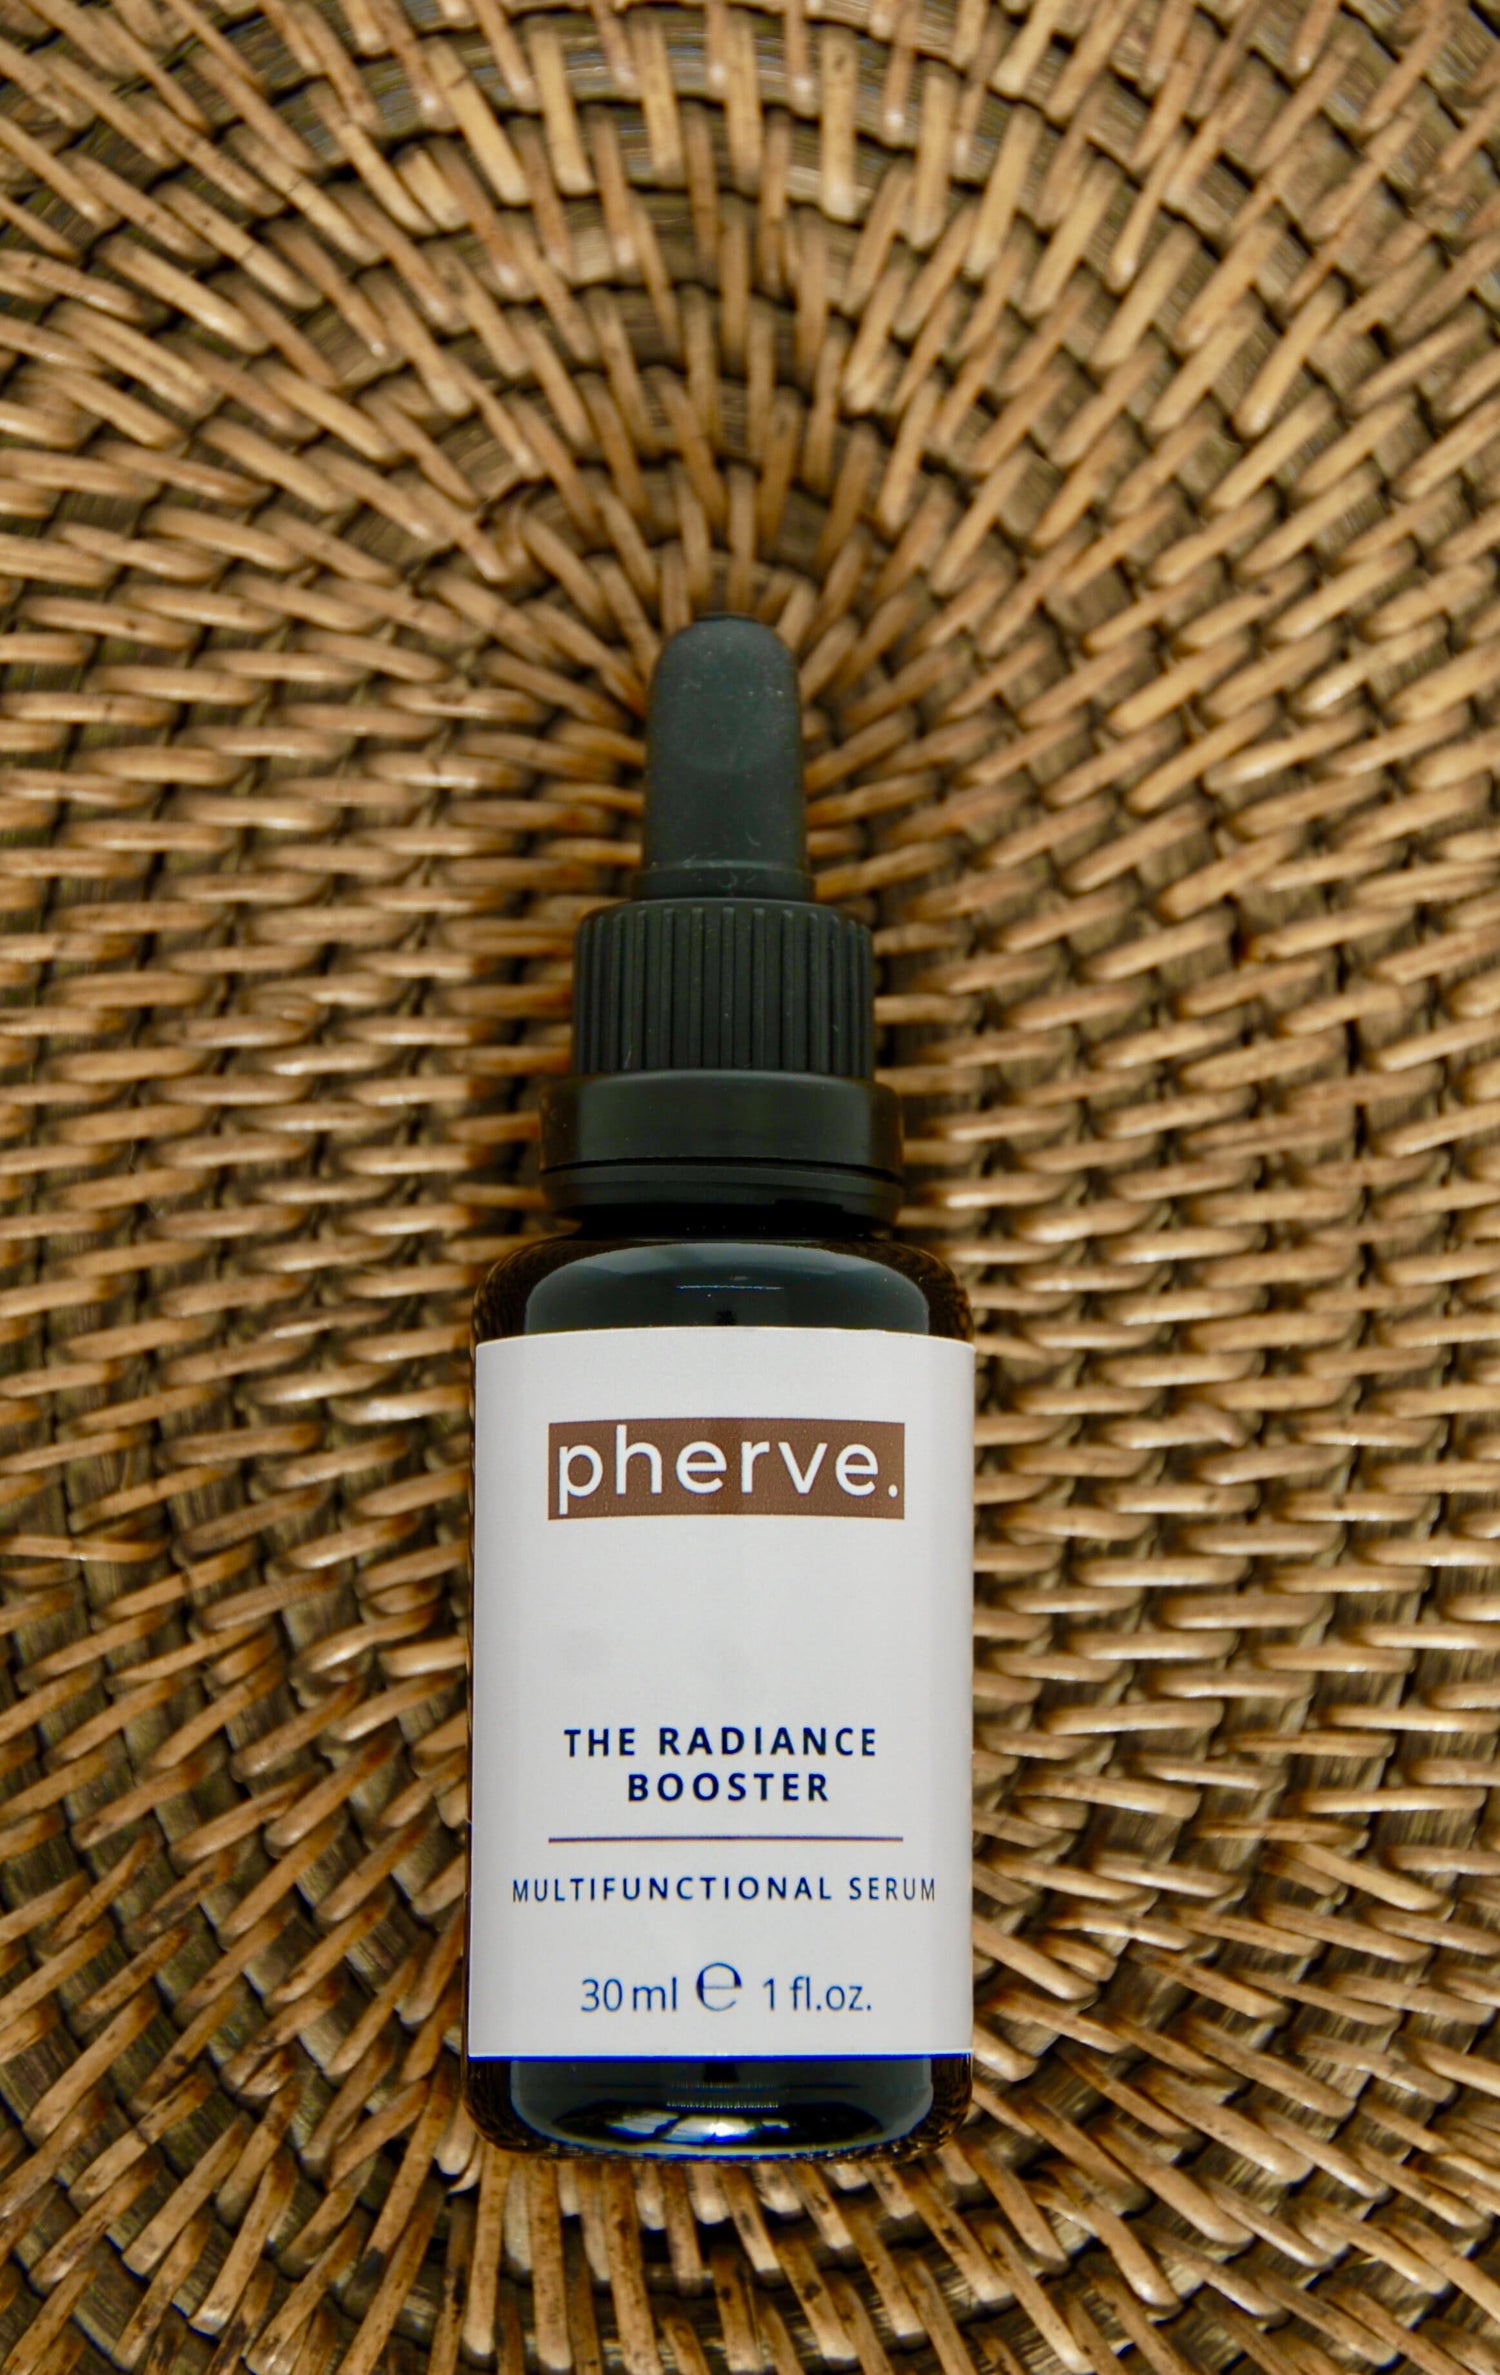 Image of the Radiance Booster serum bottle on a wooden background to amplify its multiple skin benefits